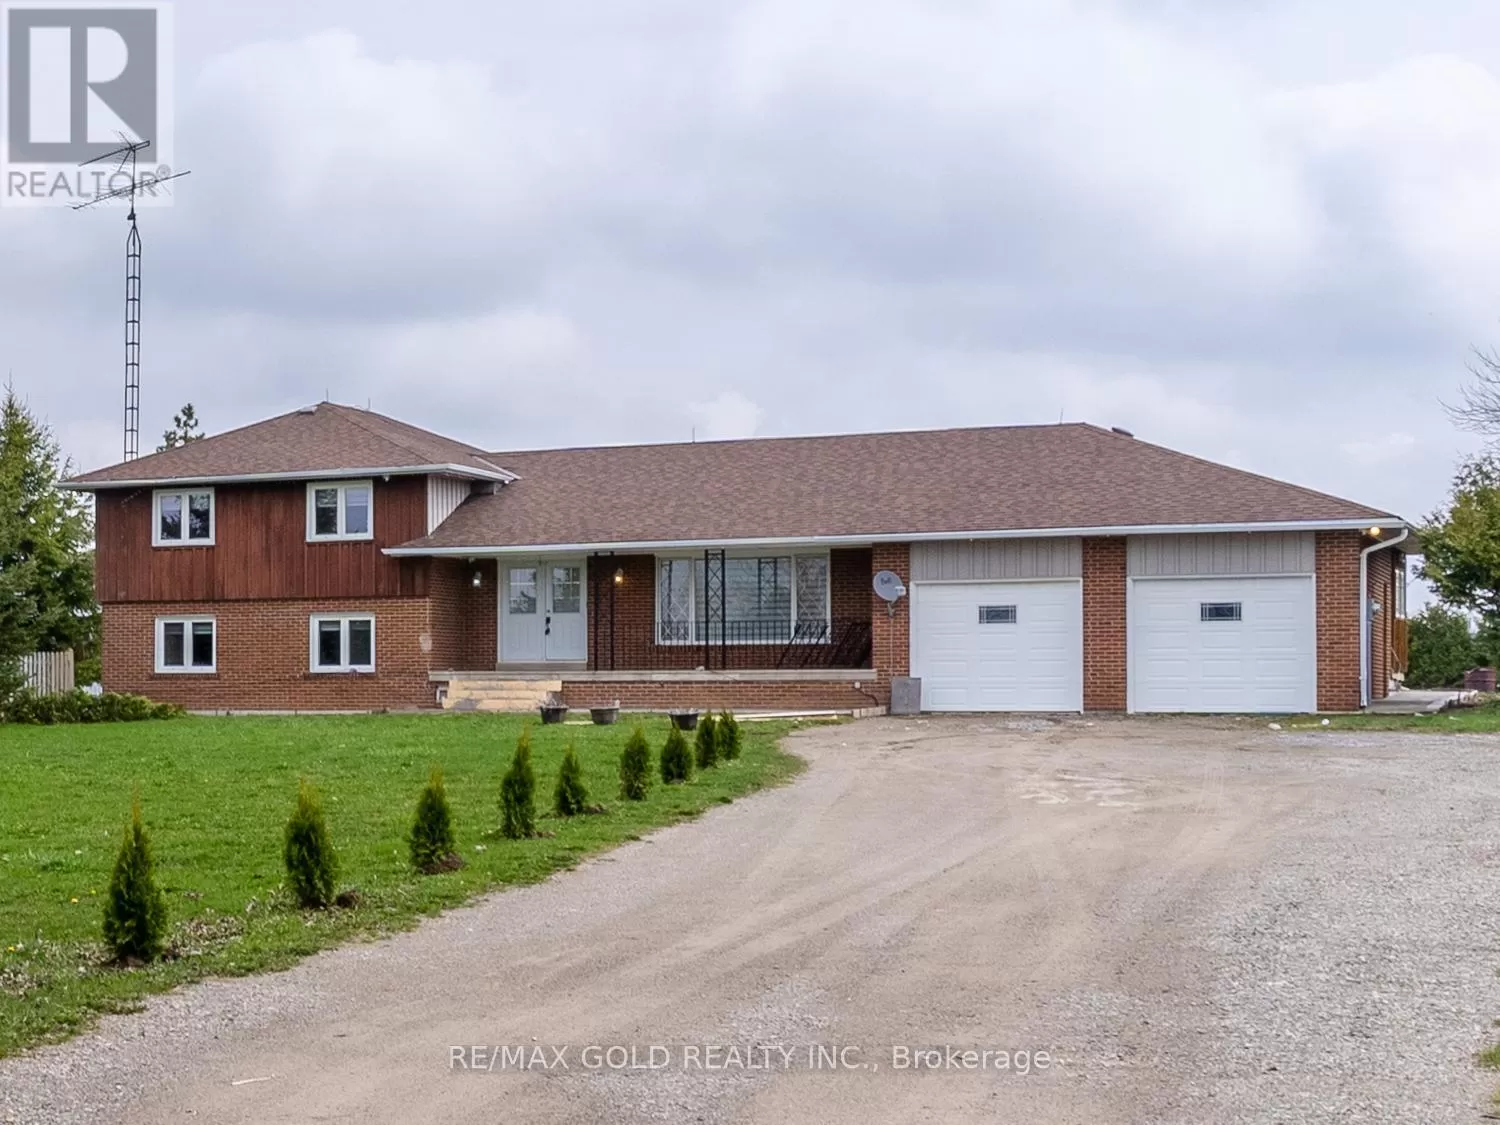 House for rent: 20205 Kennedy Road, Caledon, Ontario L7K 1Z2